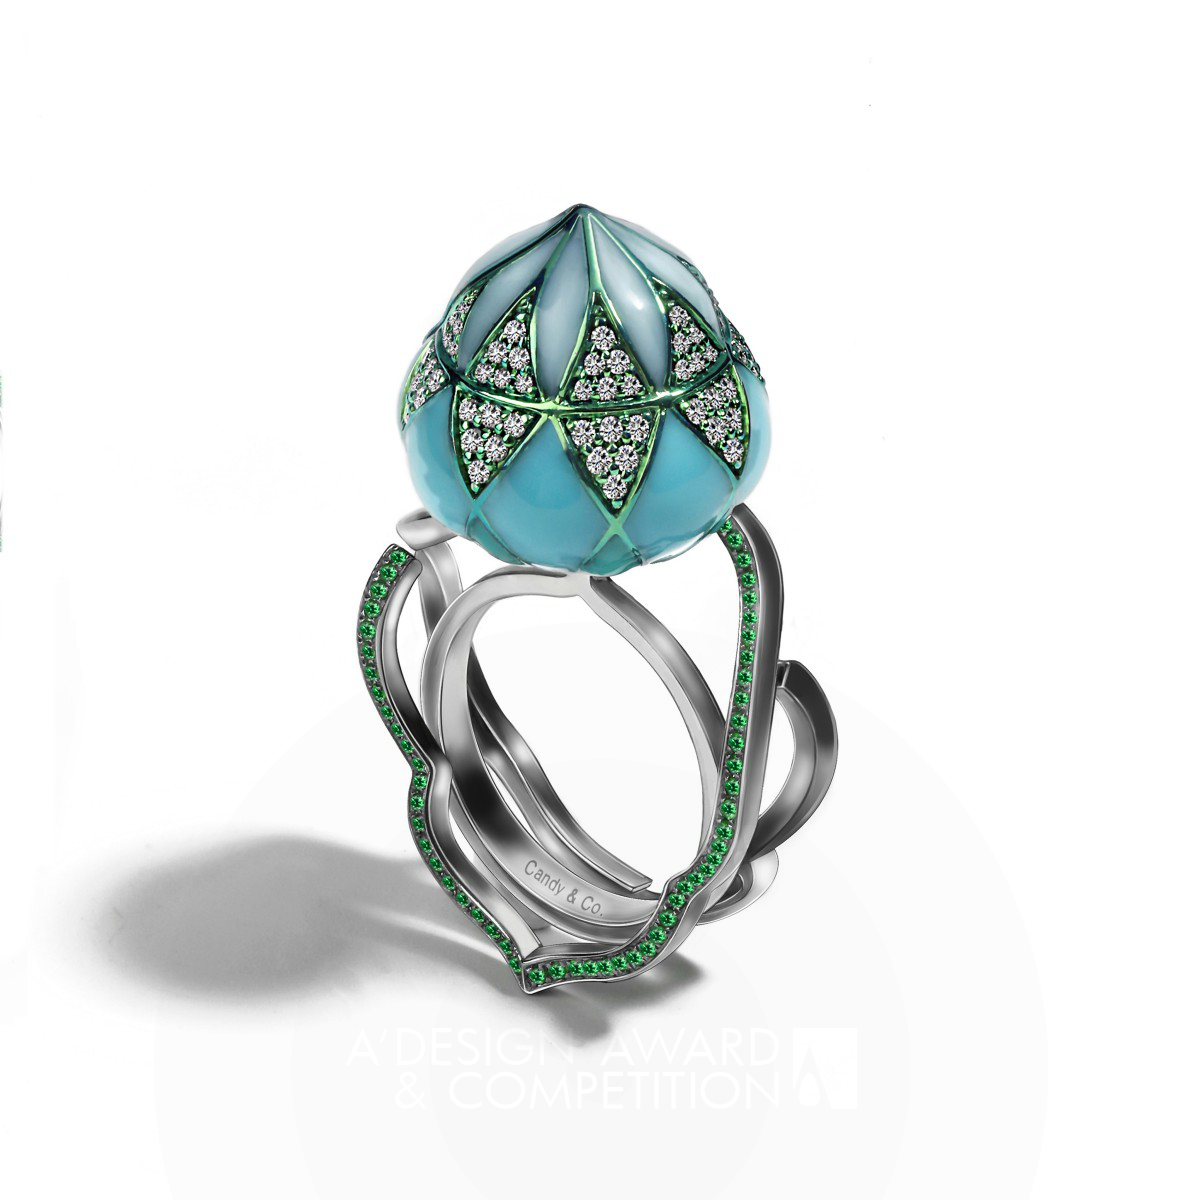 Yang Lu wins Silver at the prestigious A' Jewelry Design Award with Troitsk Emerald Ring.